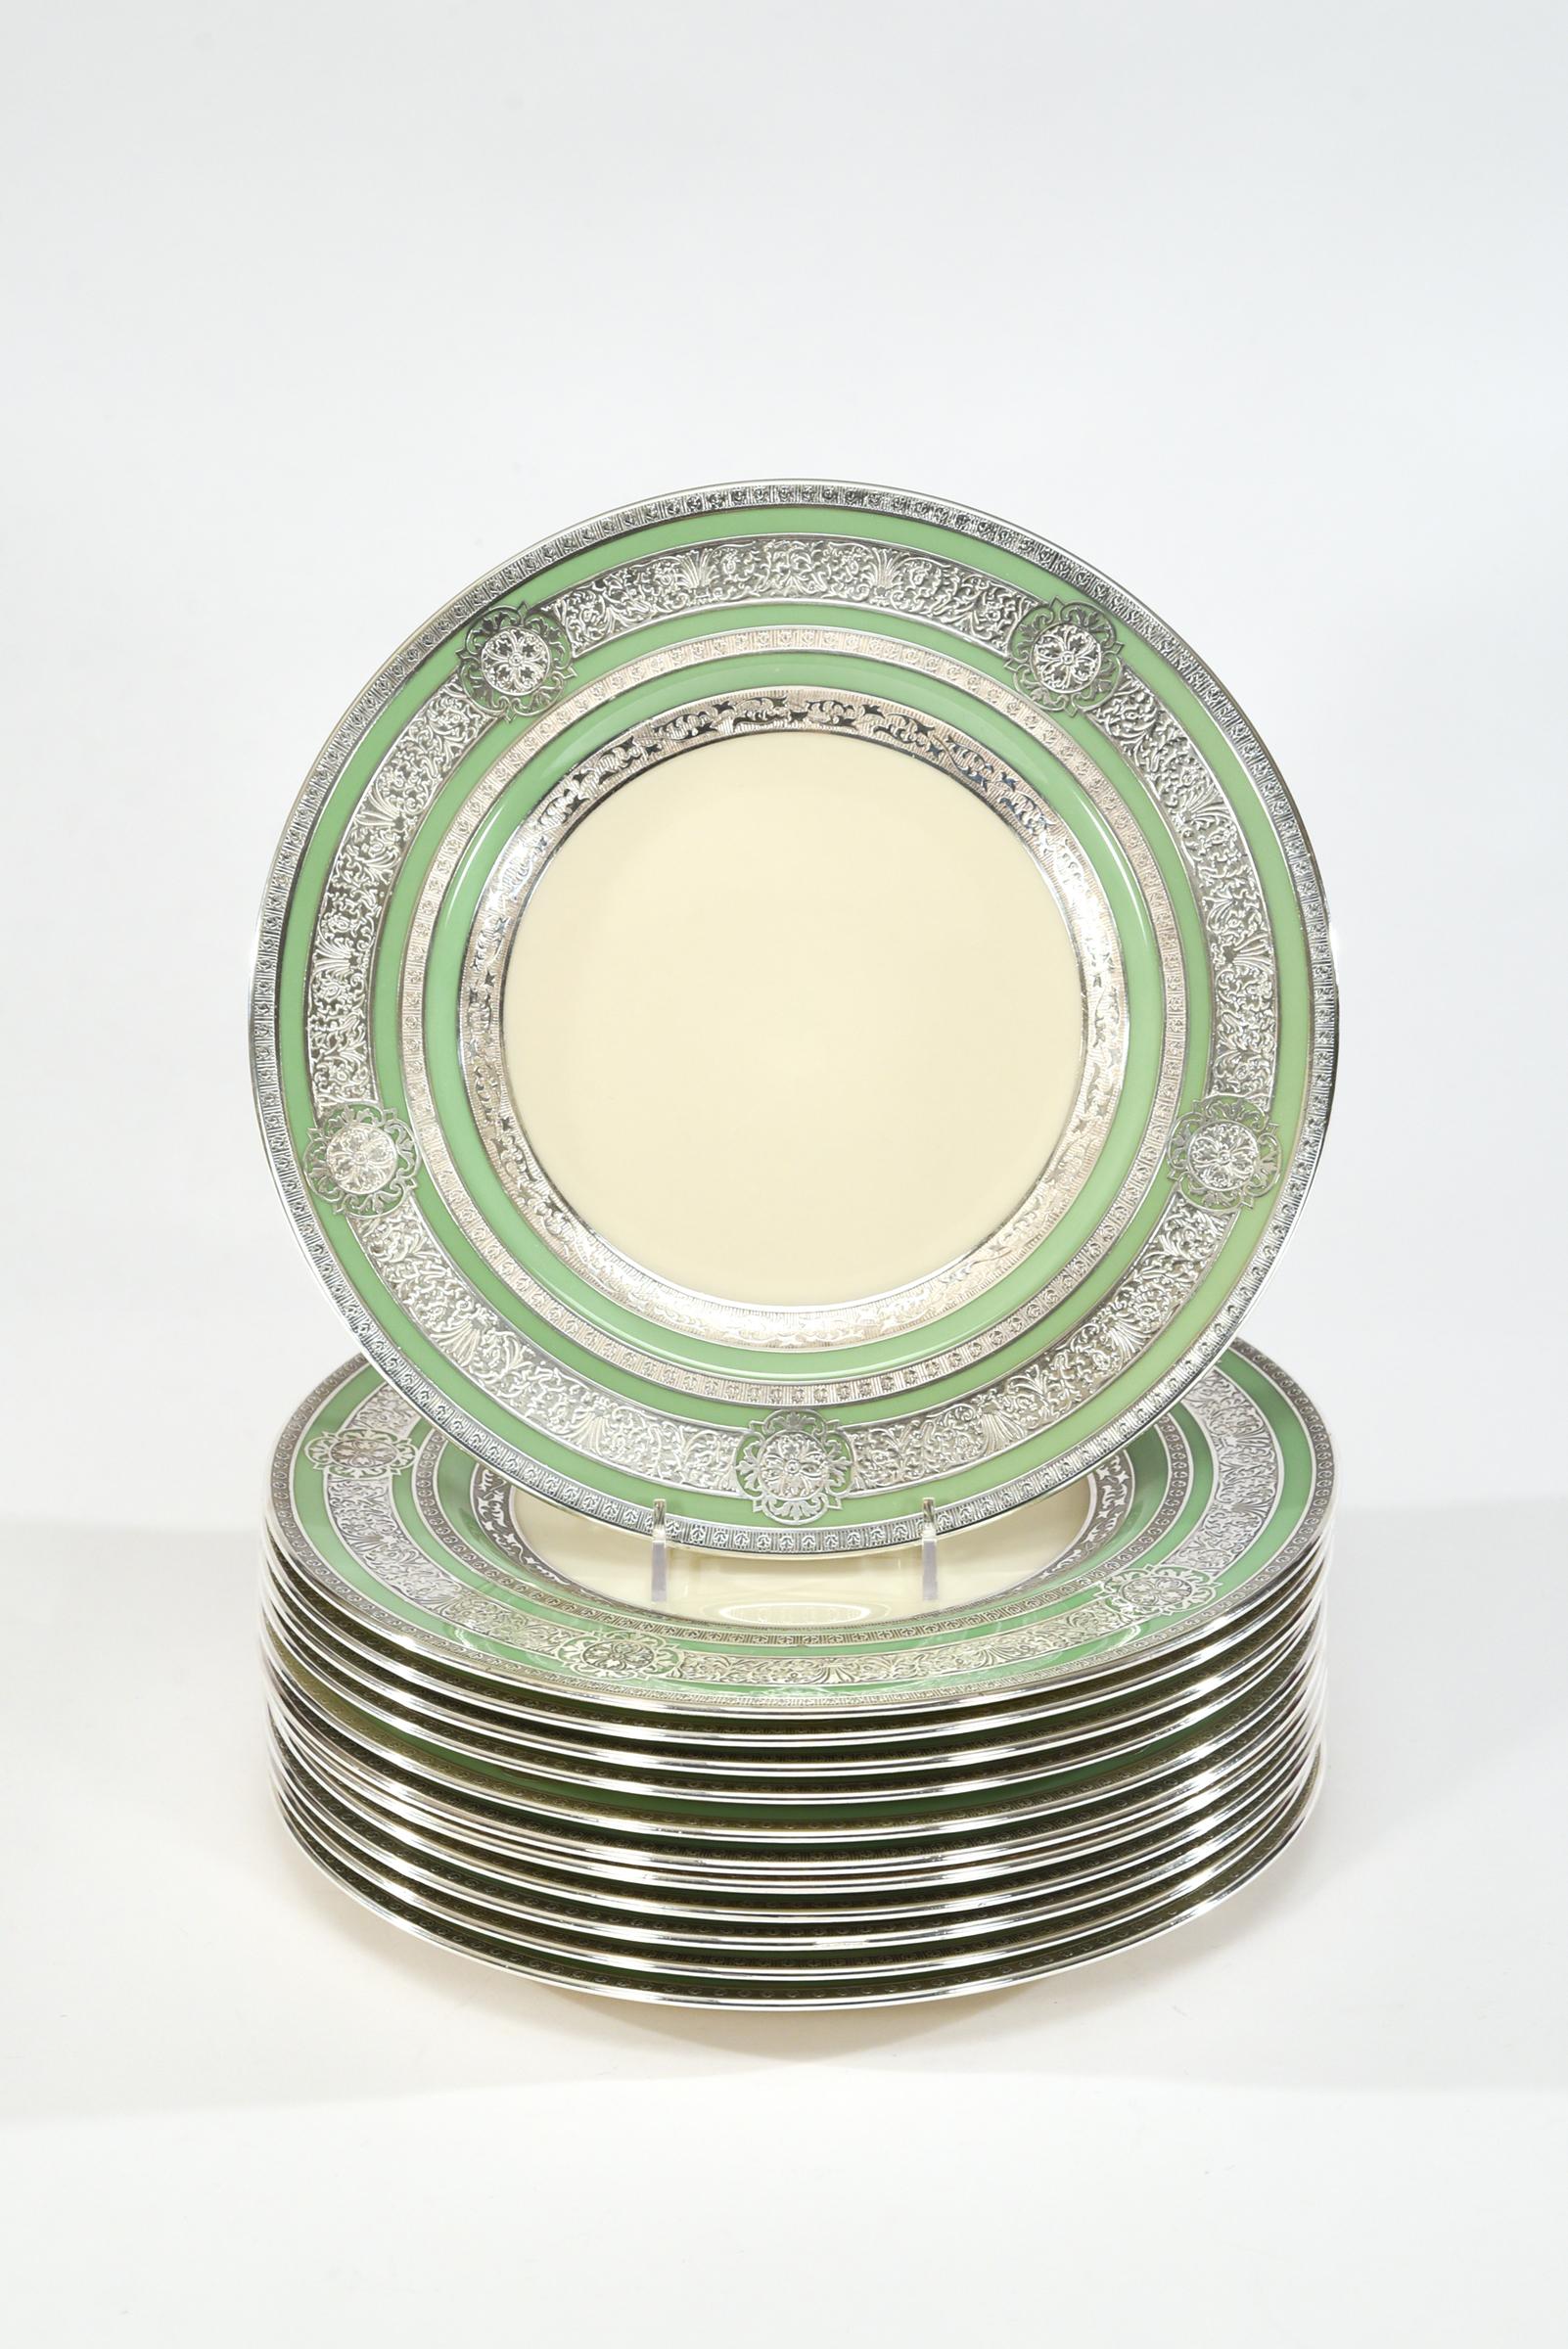 This set of 12 Morgan Belleek dinner plates are decorated with four gorgeous filigree silver overlay bands which frame the green border and ivory centers. These are true showstoppers, their 10 3/4